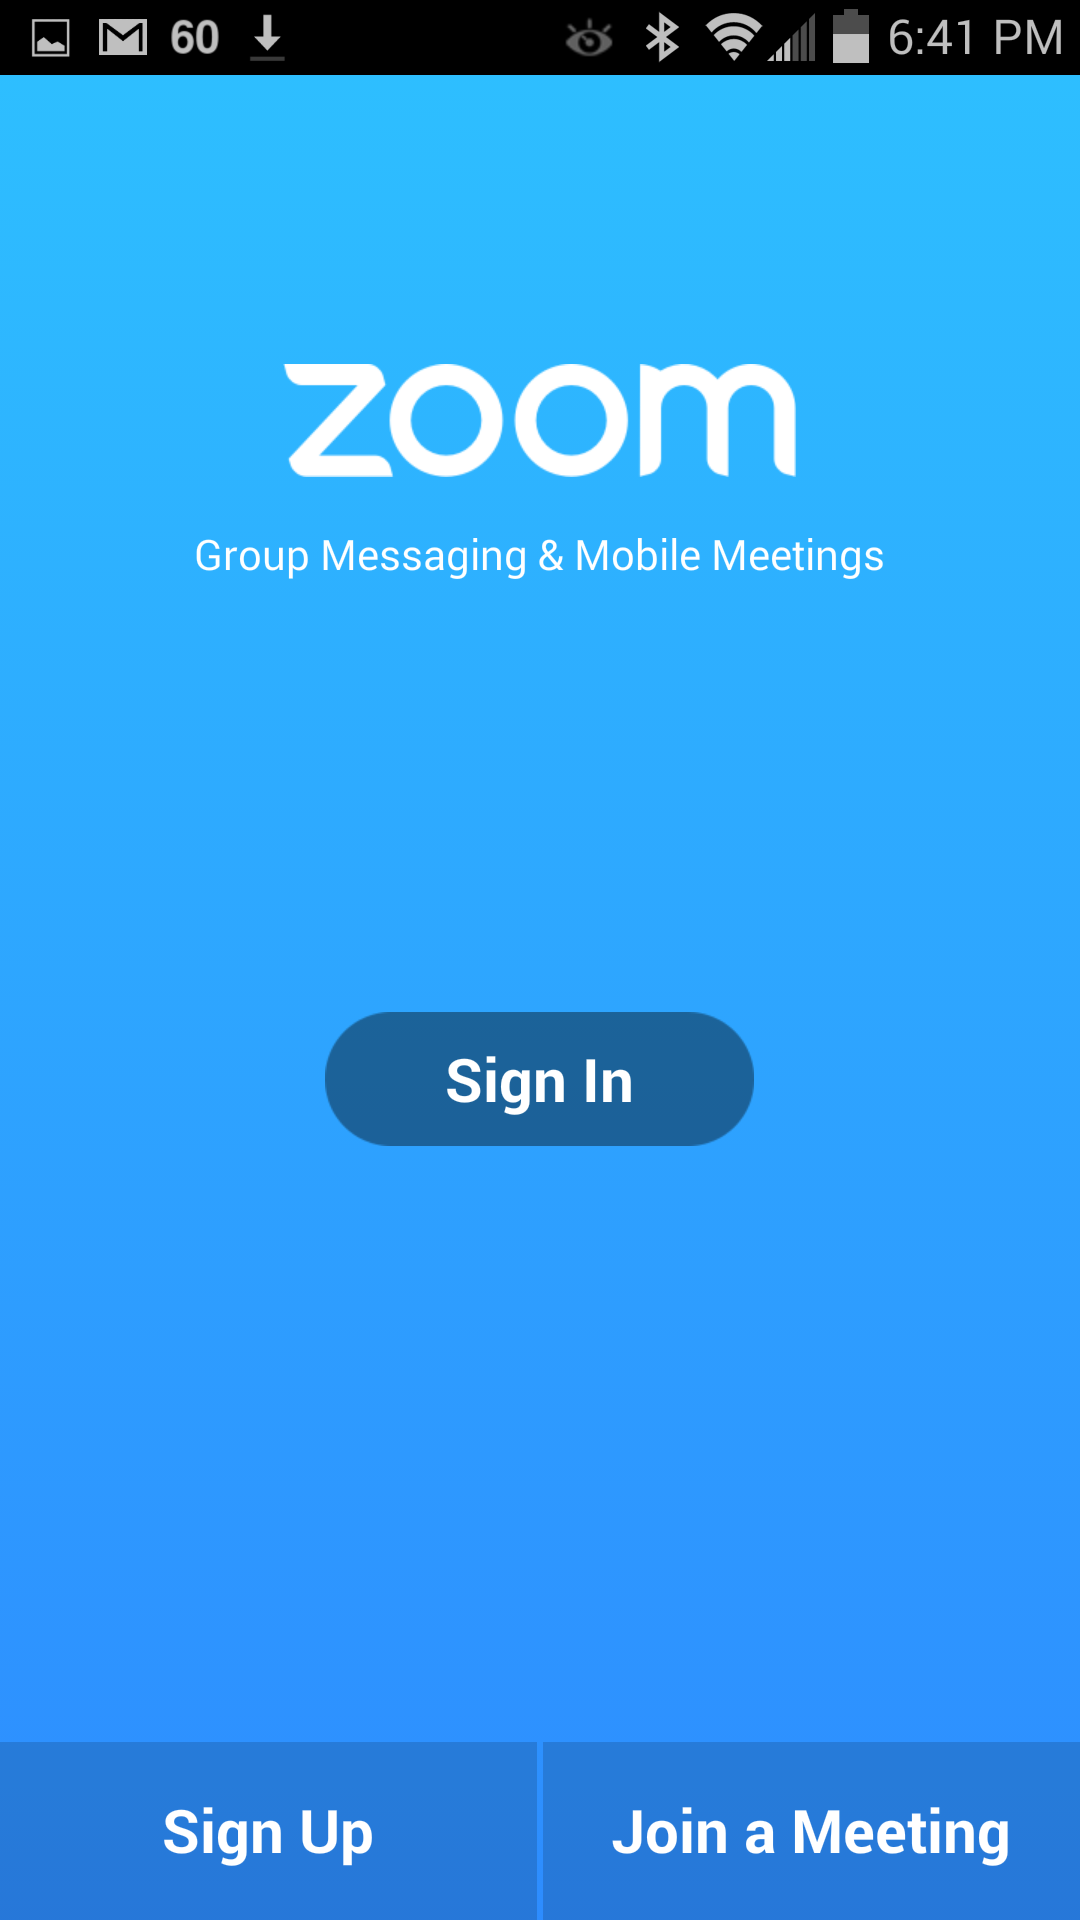 Getting Started with Android – Zoom Help Center